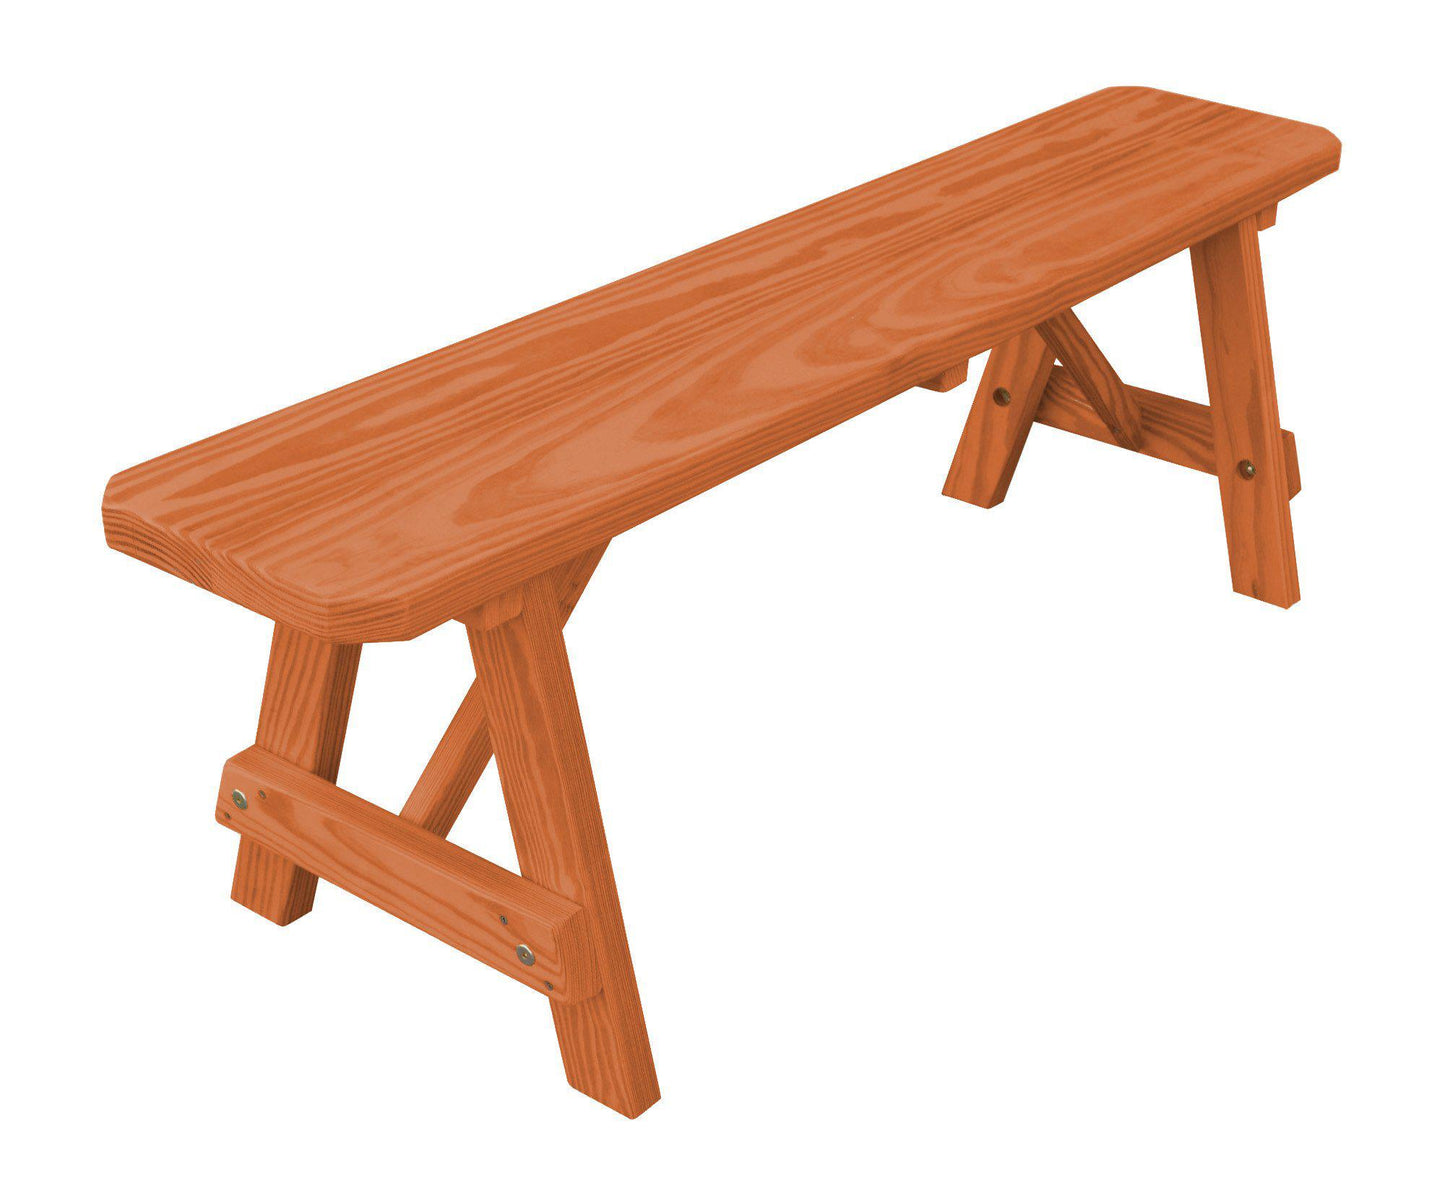 A&L Furniture Co. Pressure Treated Pine 55" Traditional Bench Only - LEAD TIME TO SHIP 10 BUSINESS DAYS